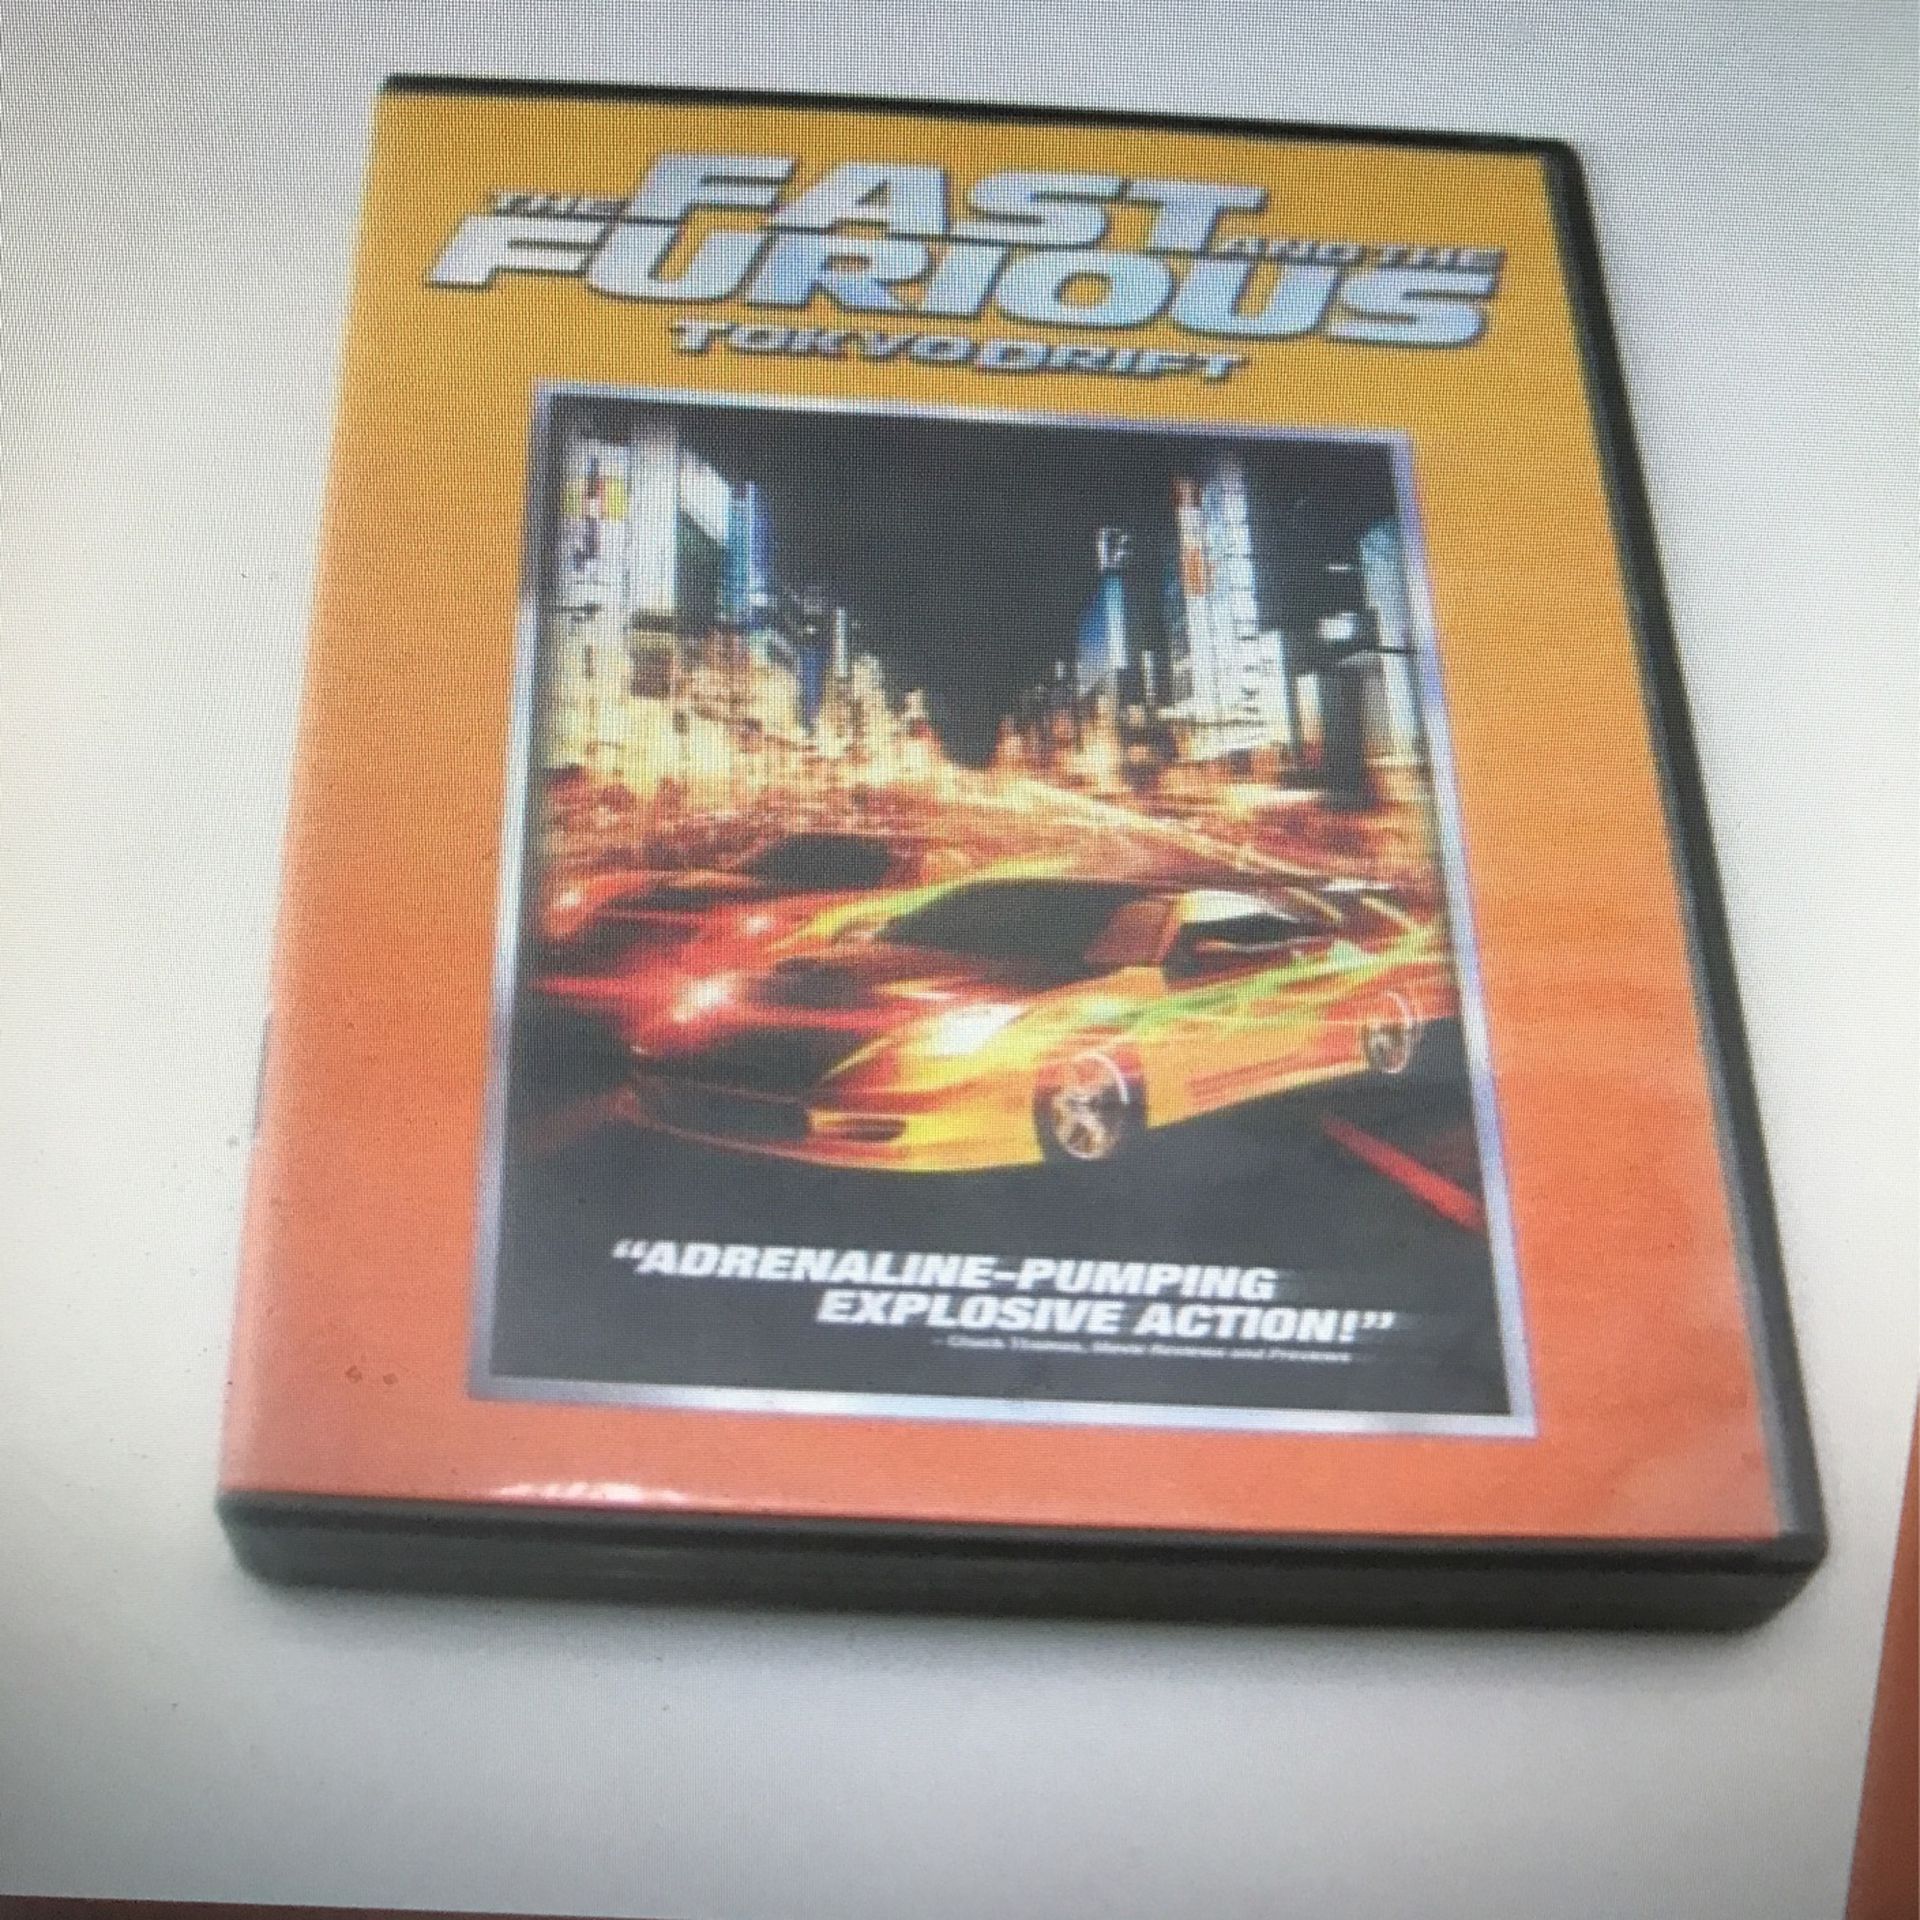 The Fast and The Furious: Tokyo Drift (DVD) (widescreen) (Universal) (PG-13)